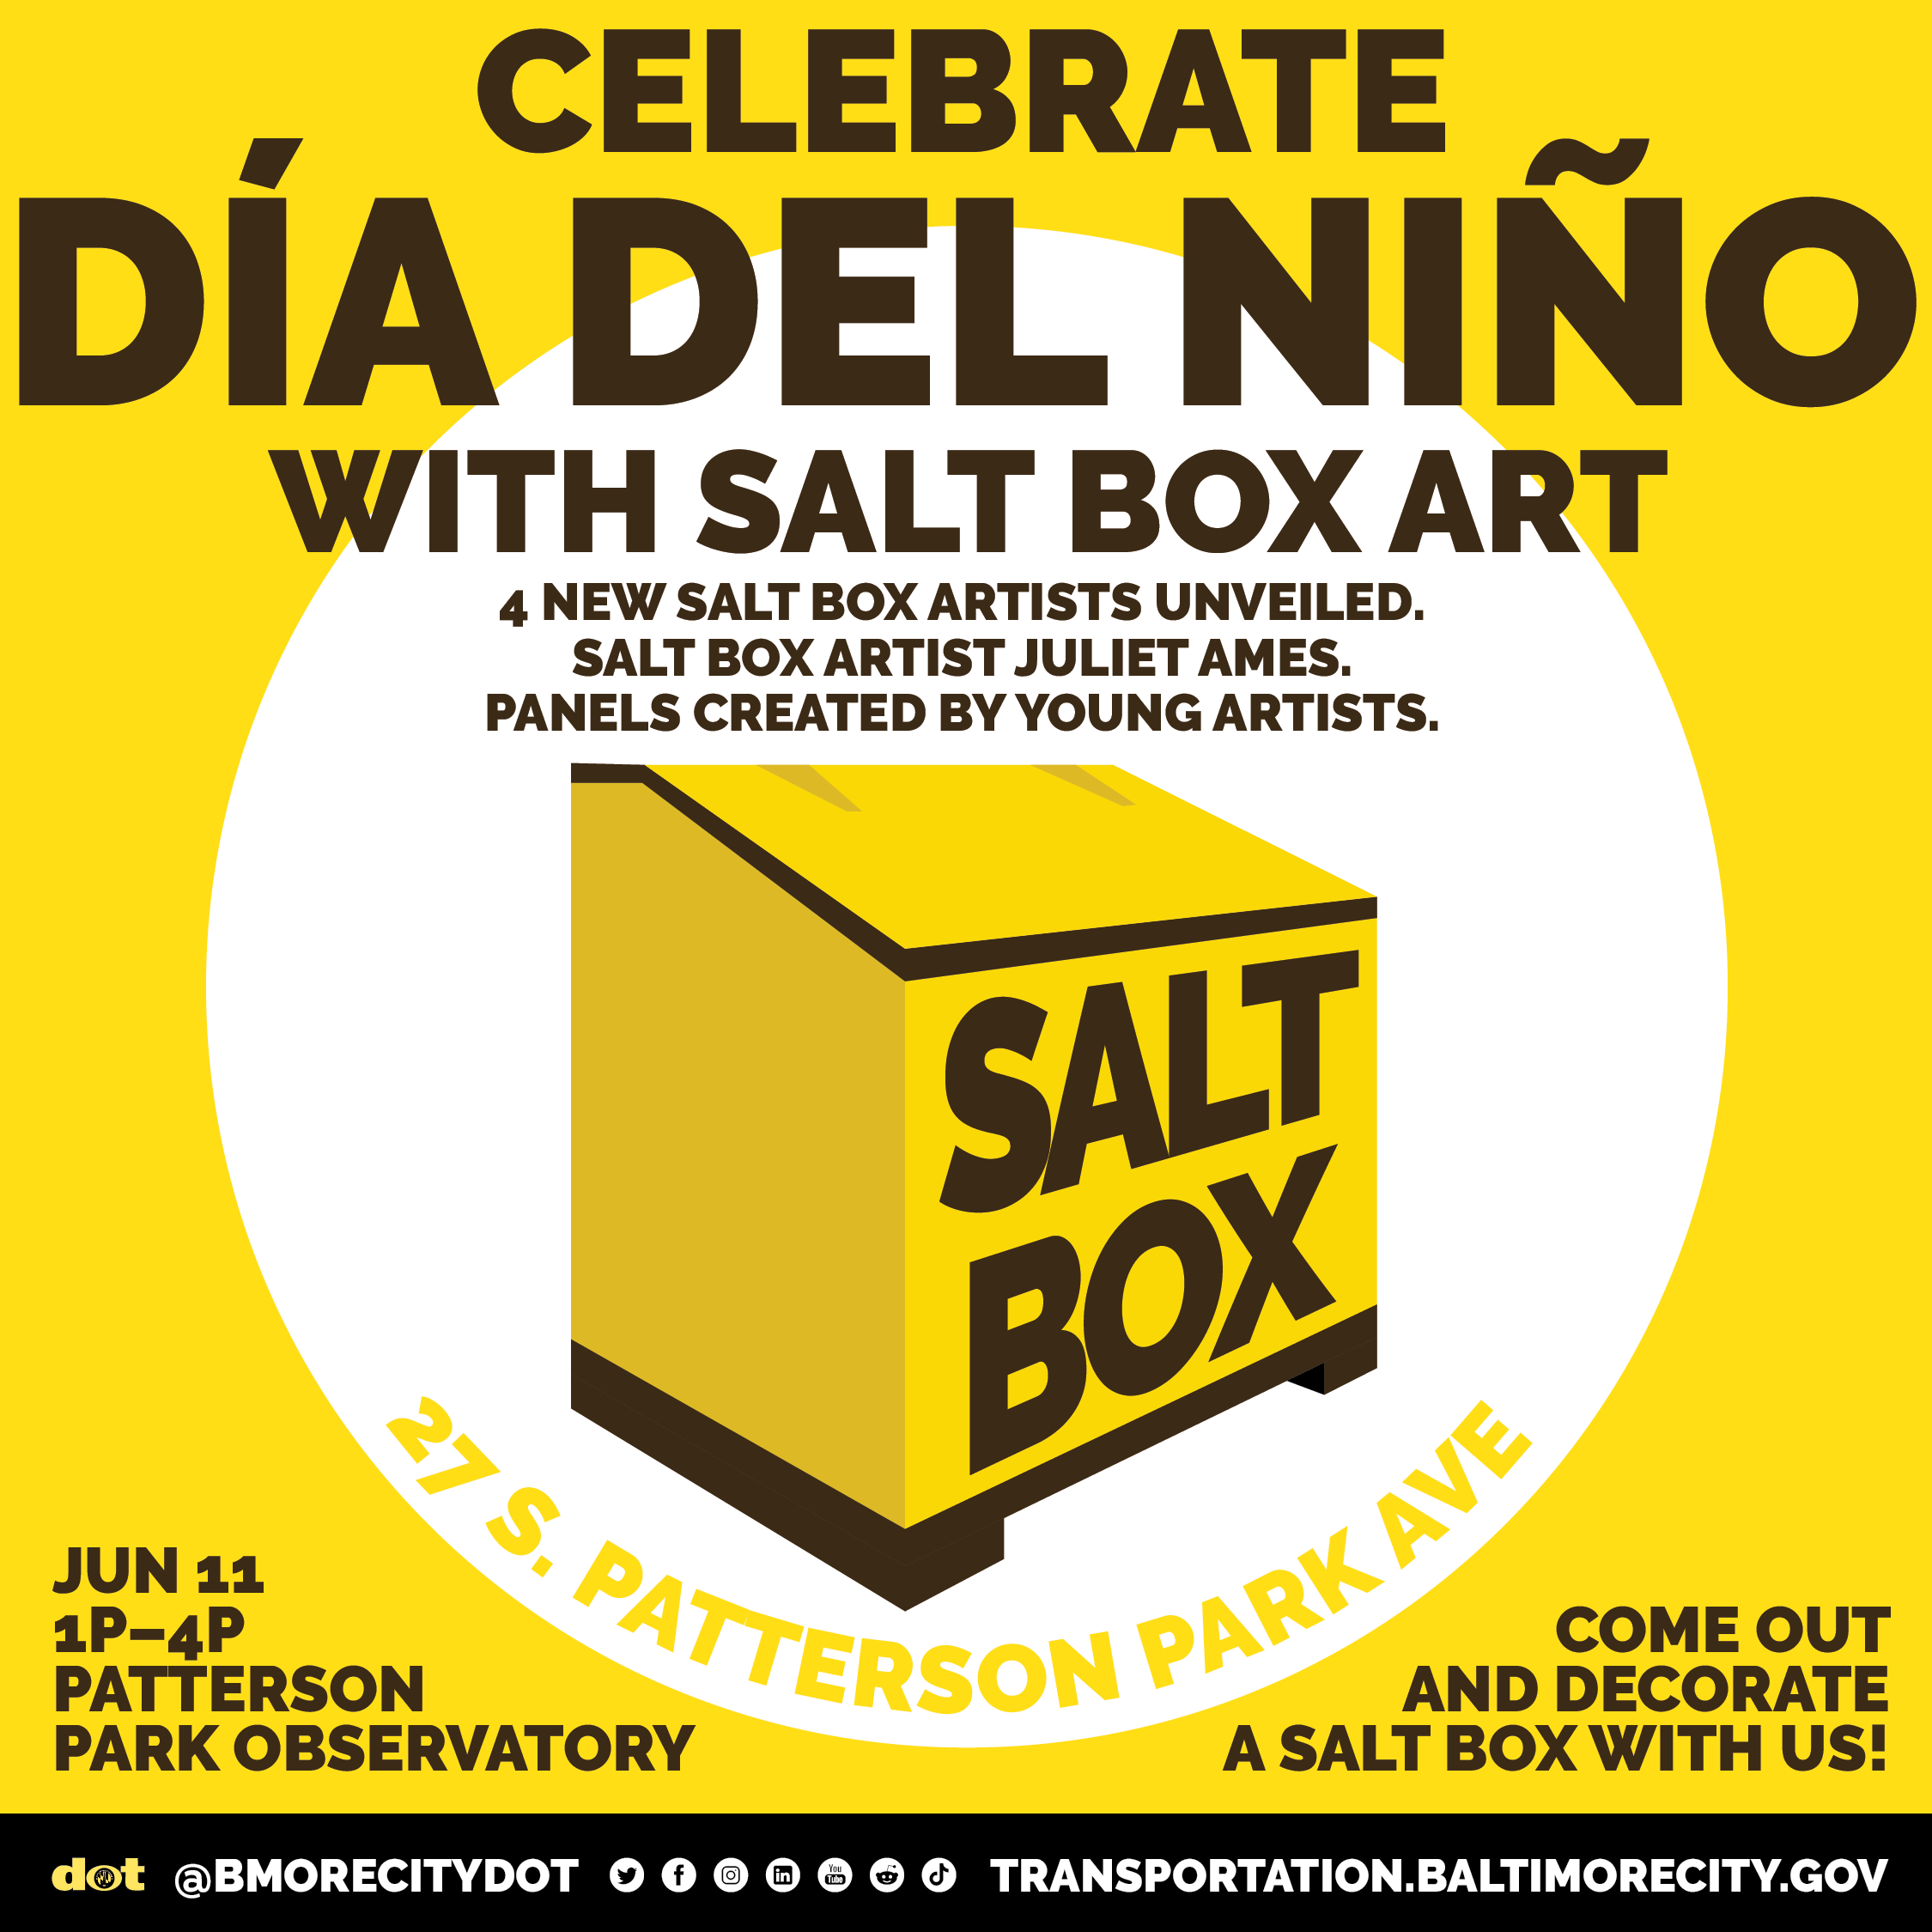 Celebrate Día del Niño with Salt Box Art! 4 New Salt Box Artists Unveiled. Salt Box Artist Juliet Ames. Panels created by young artists. 27 S Patterson Park Ave. Apr 29, 11A–2P at the Patterson Park Observatory. Come out and decorate a salt box with us!